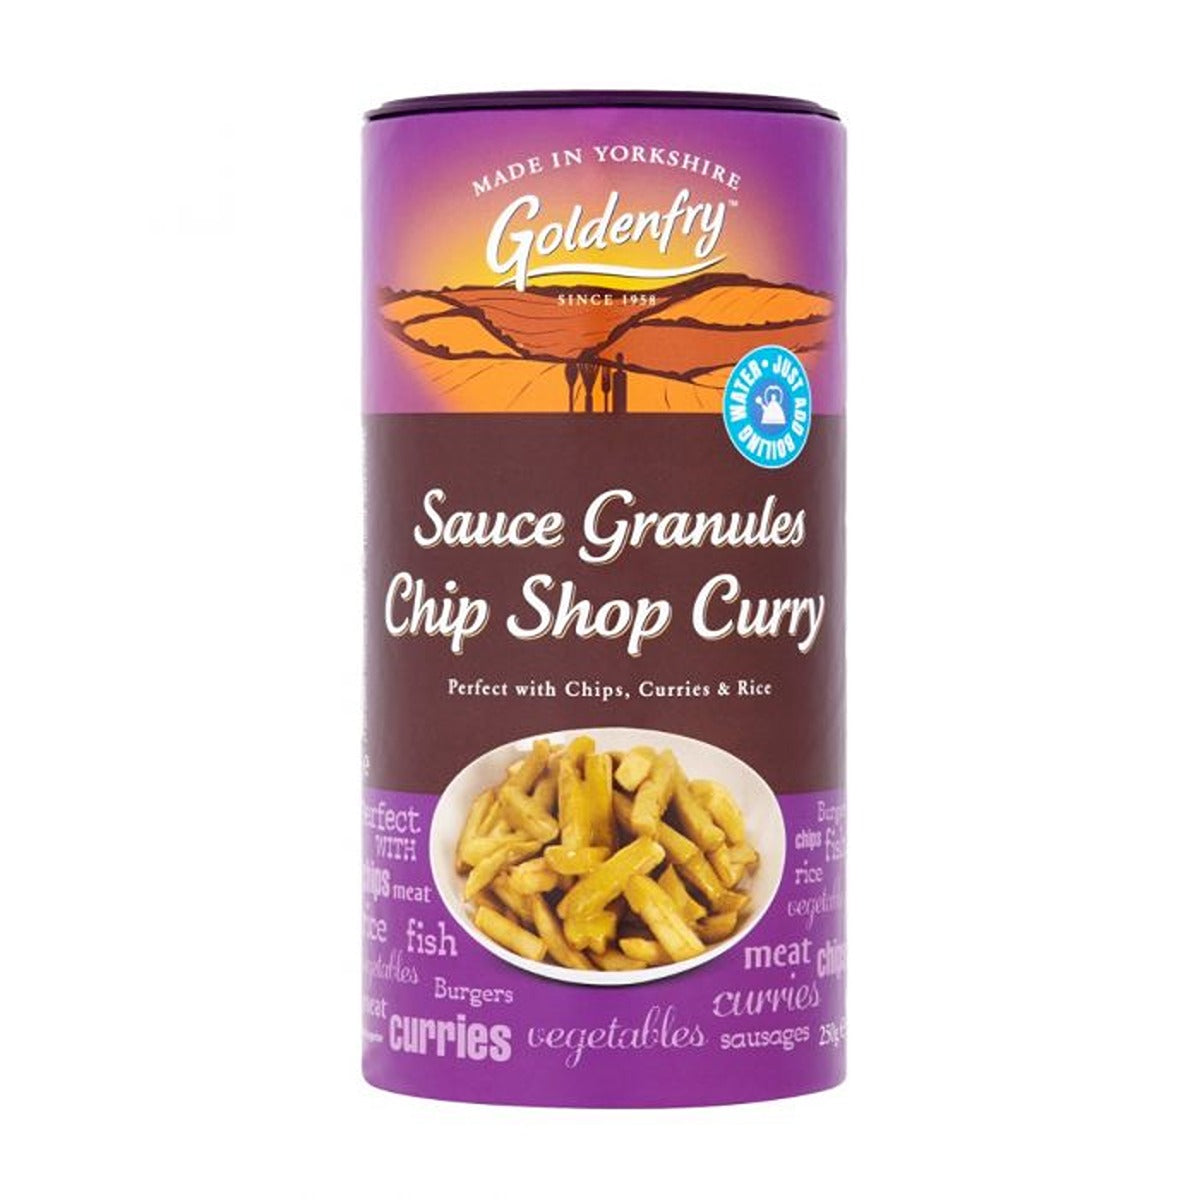 Goldenfry - Chip Shop Curry Sauce Granules - 250gr - Continental Food Store